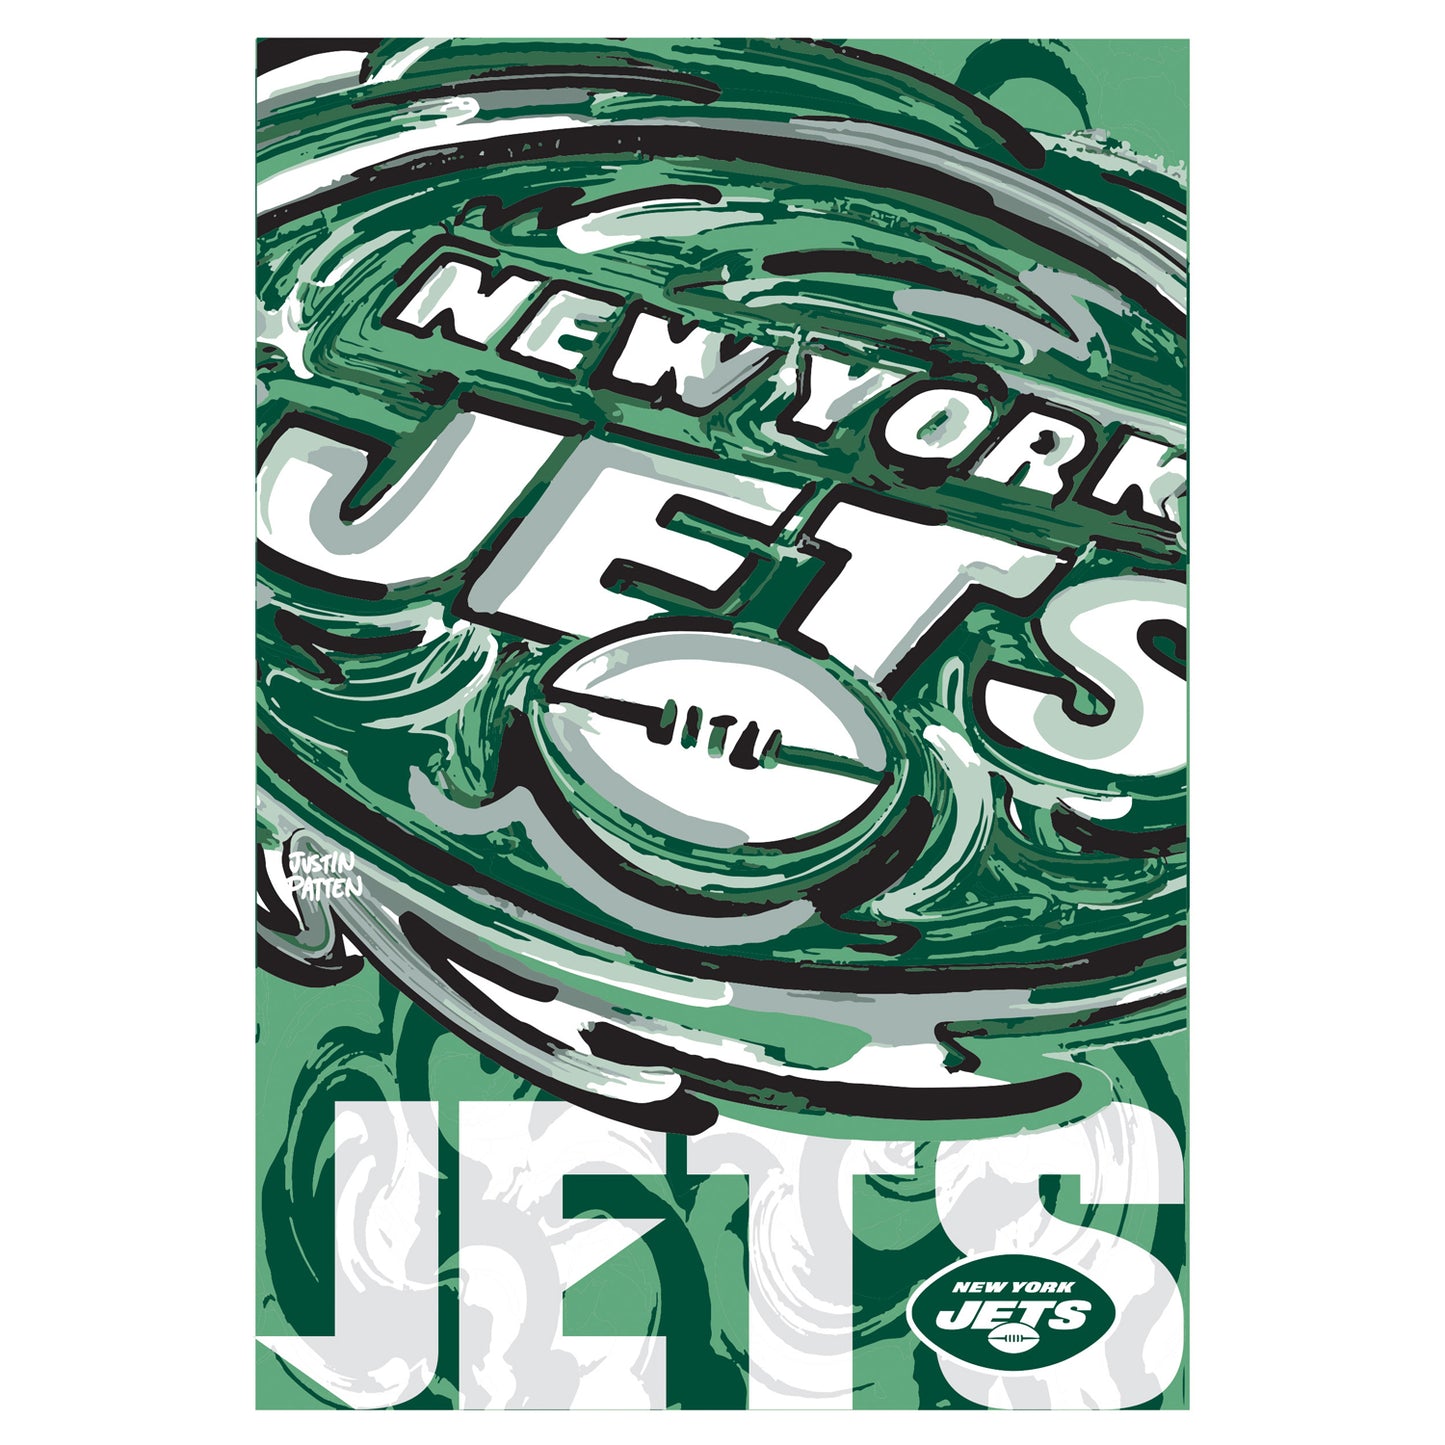 New York Jets House Flag 29" x 43" by Justin Patten